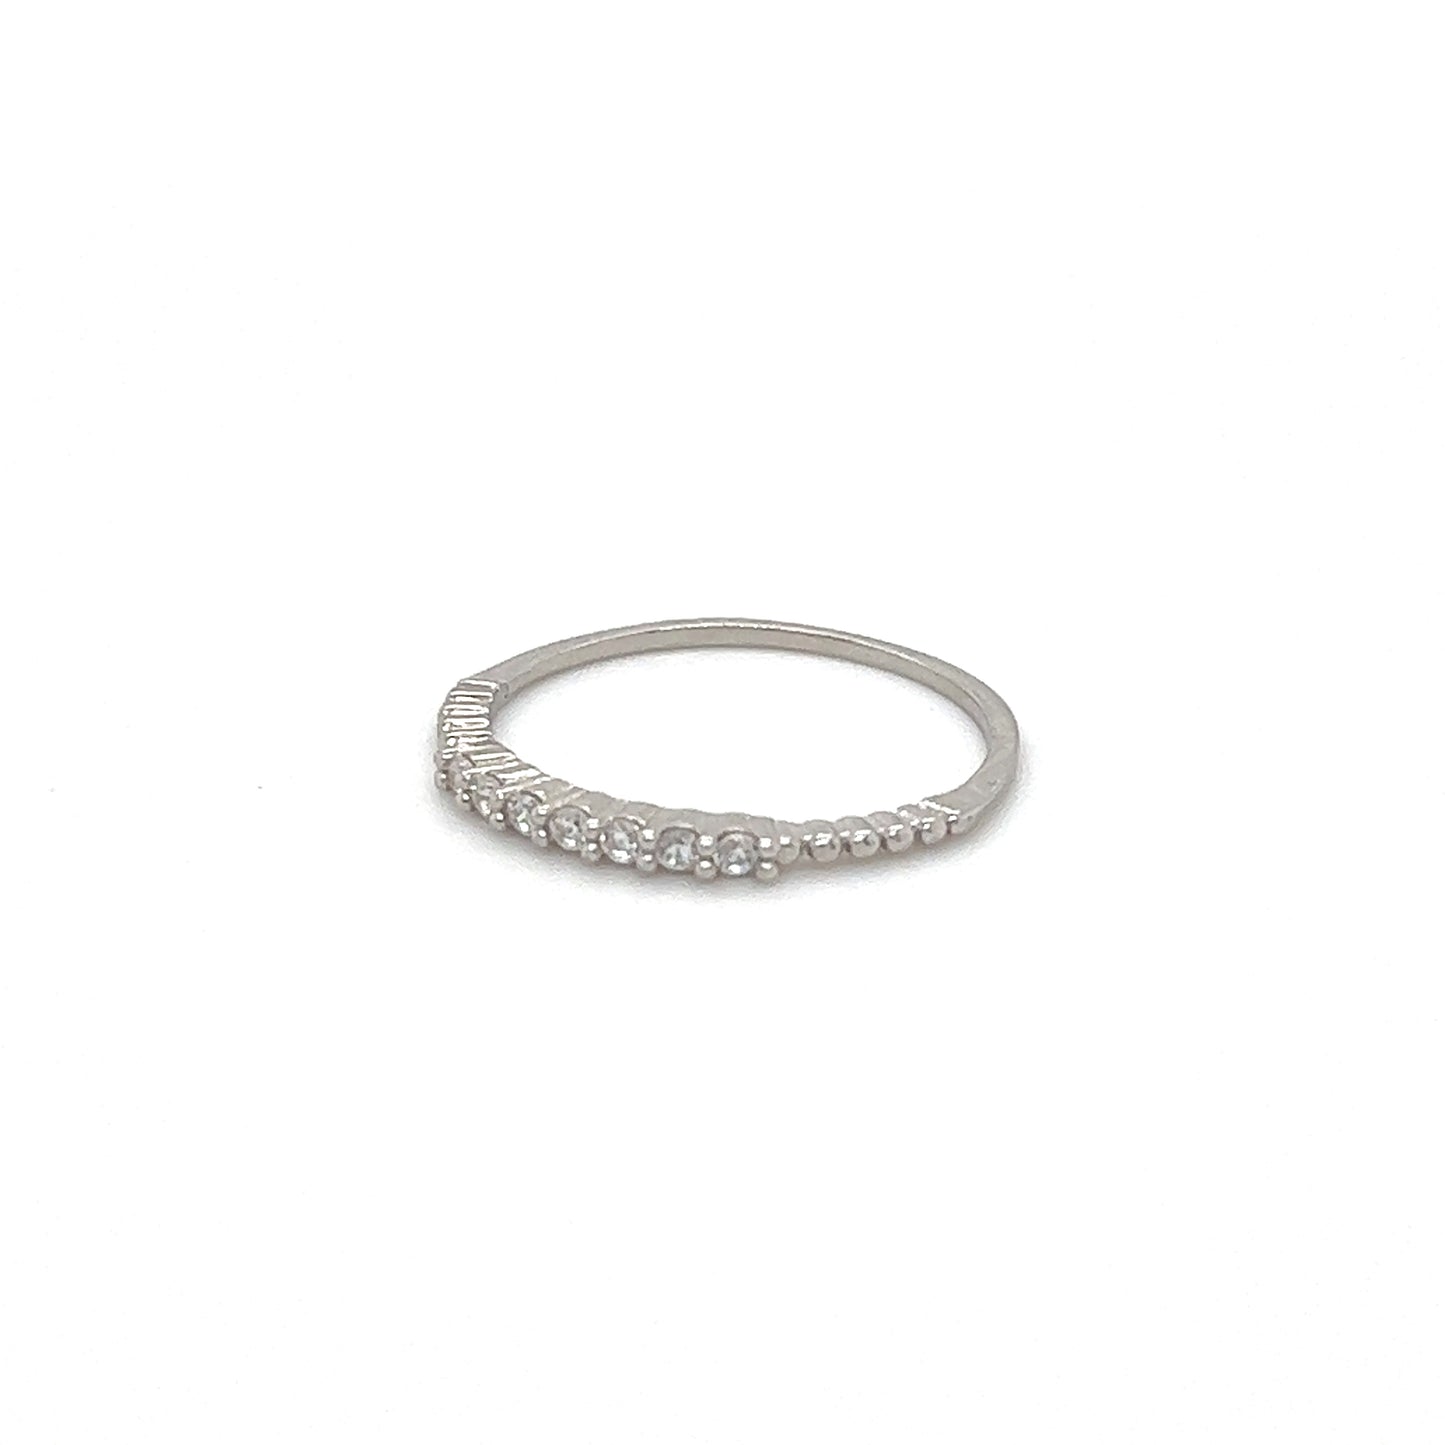 A sparkling Delicate Cubic Zirconia Stackable Ring with a row of diamonds, perfect for engagement.